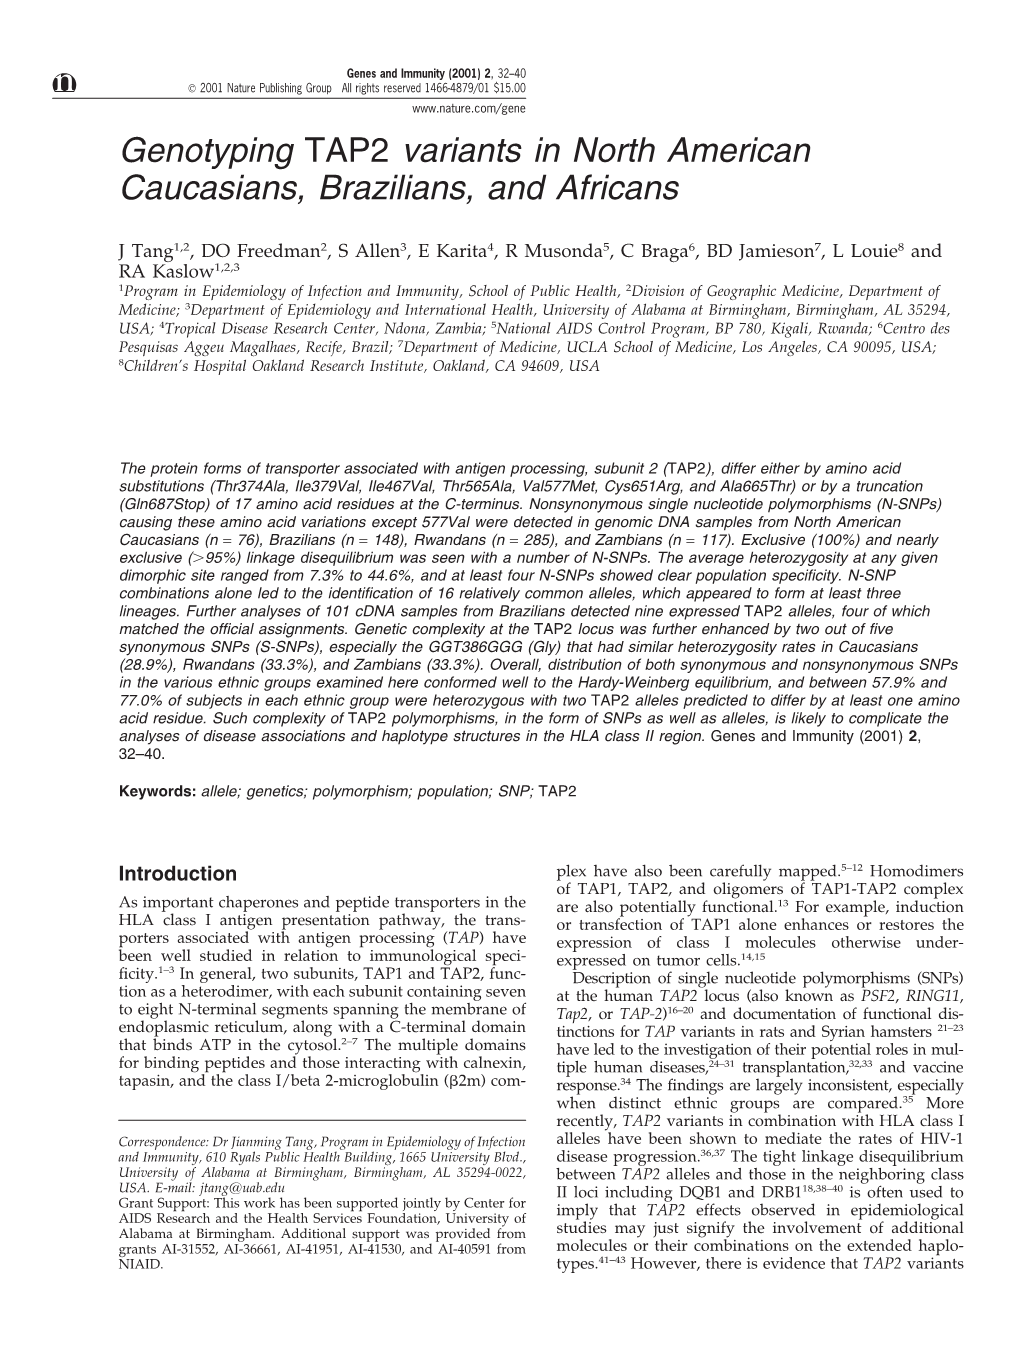 Genotyping TAP2 Variants in North American Caucasians, Brazilians, and Africans